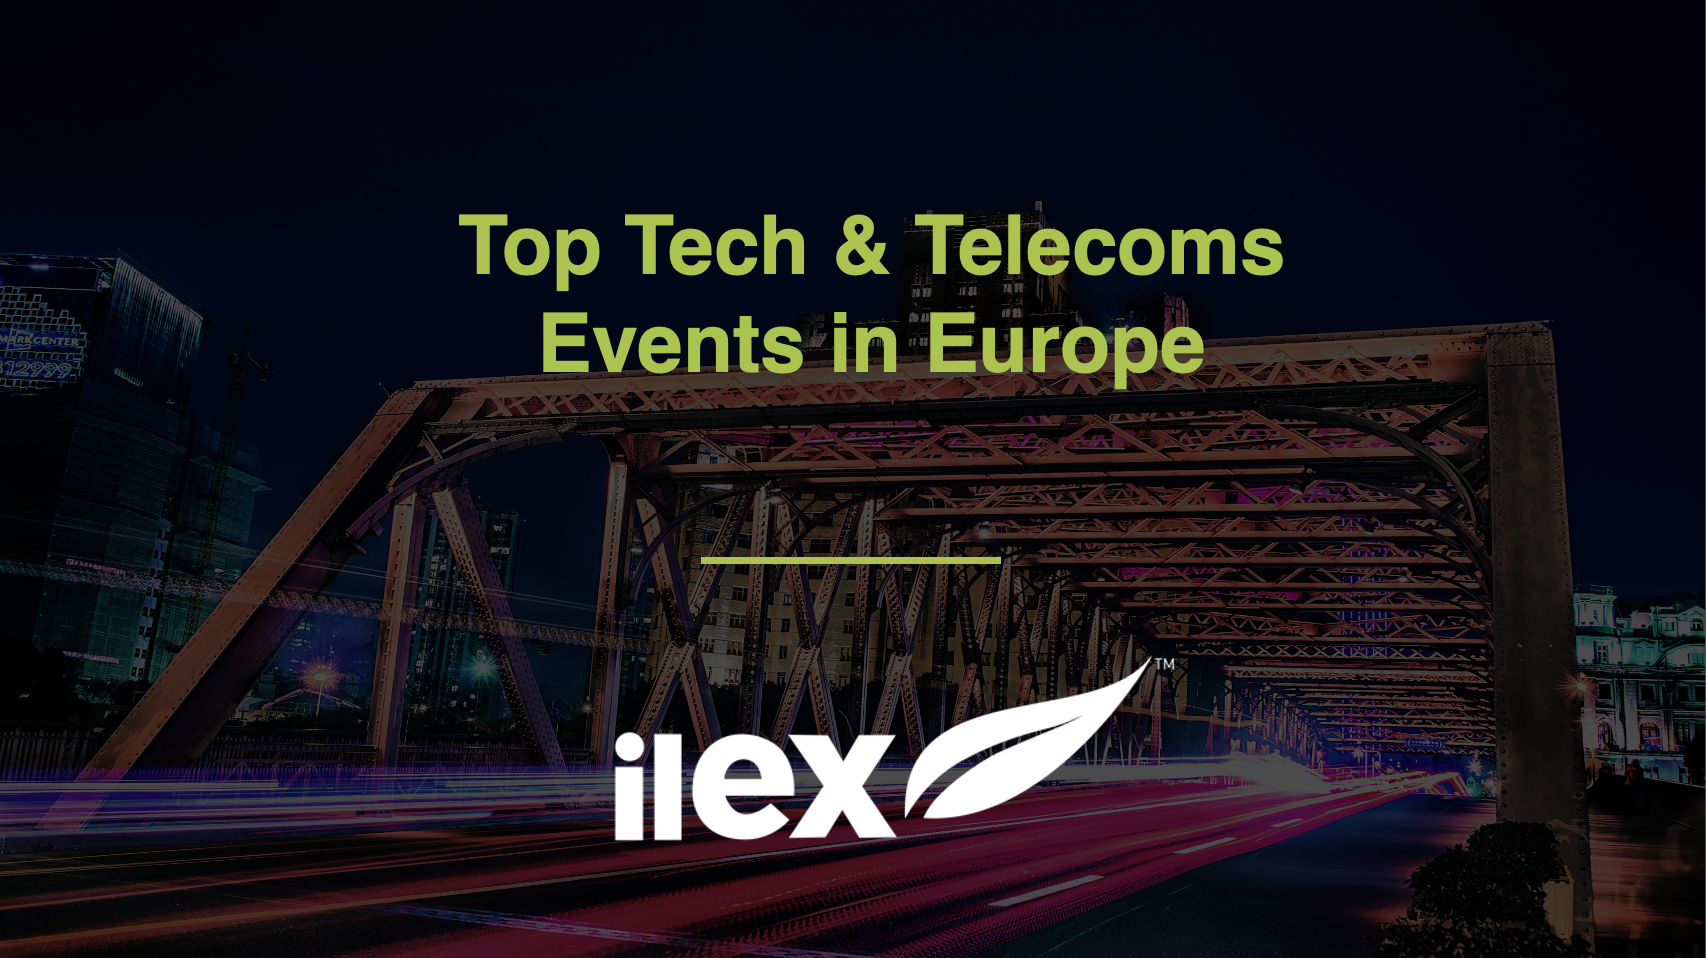 Top Tech & Telecoms Events in Europe